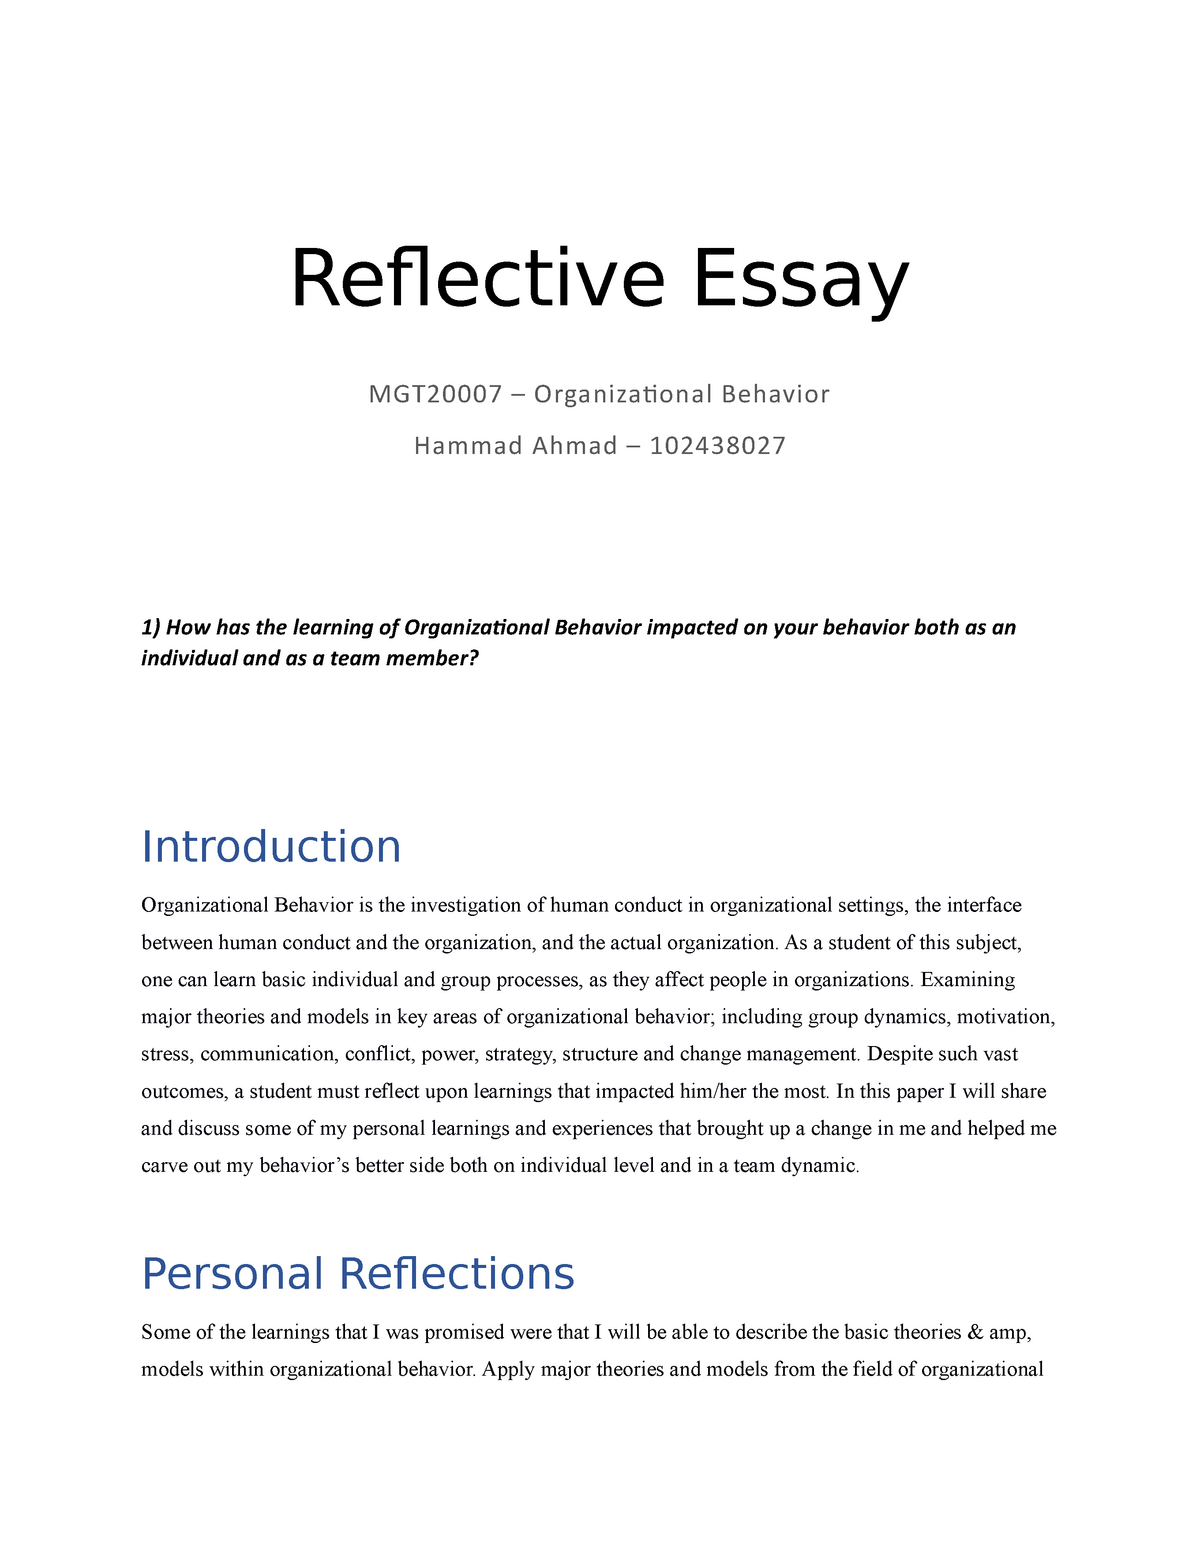 how to do reflection assignment